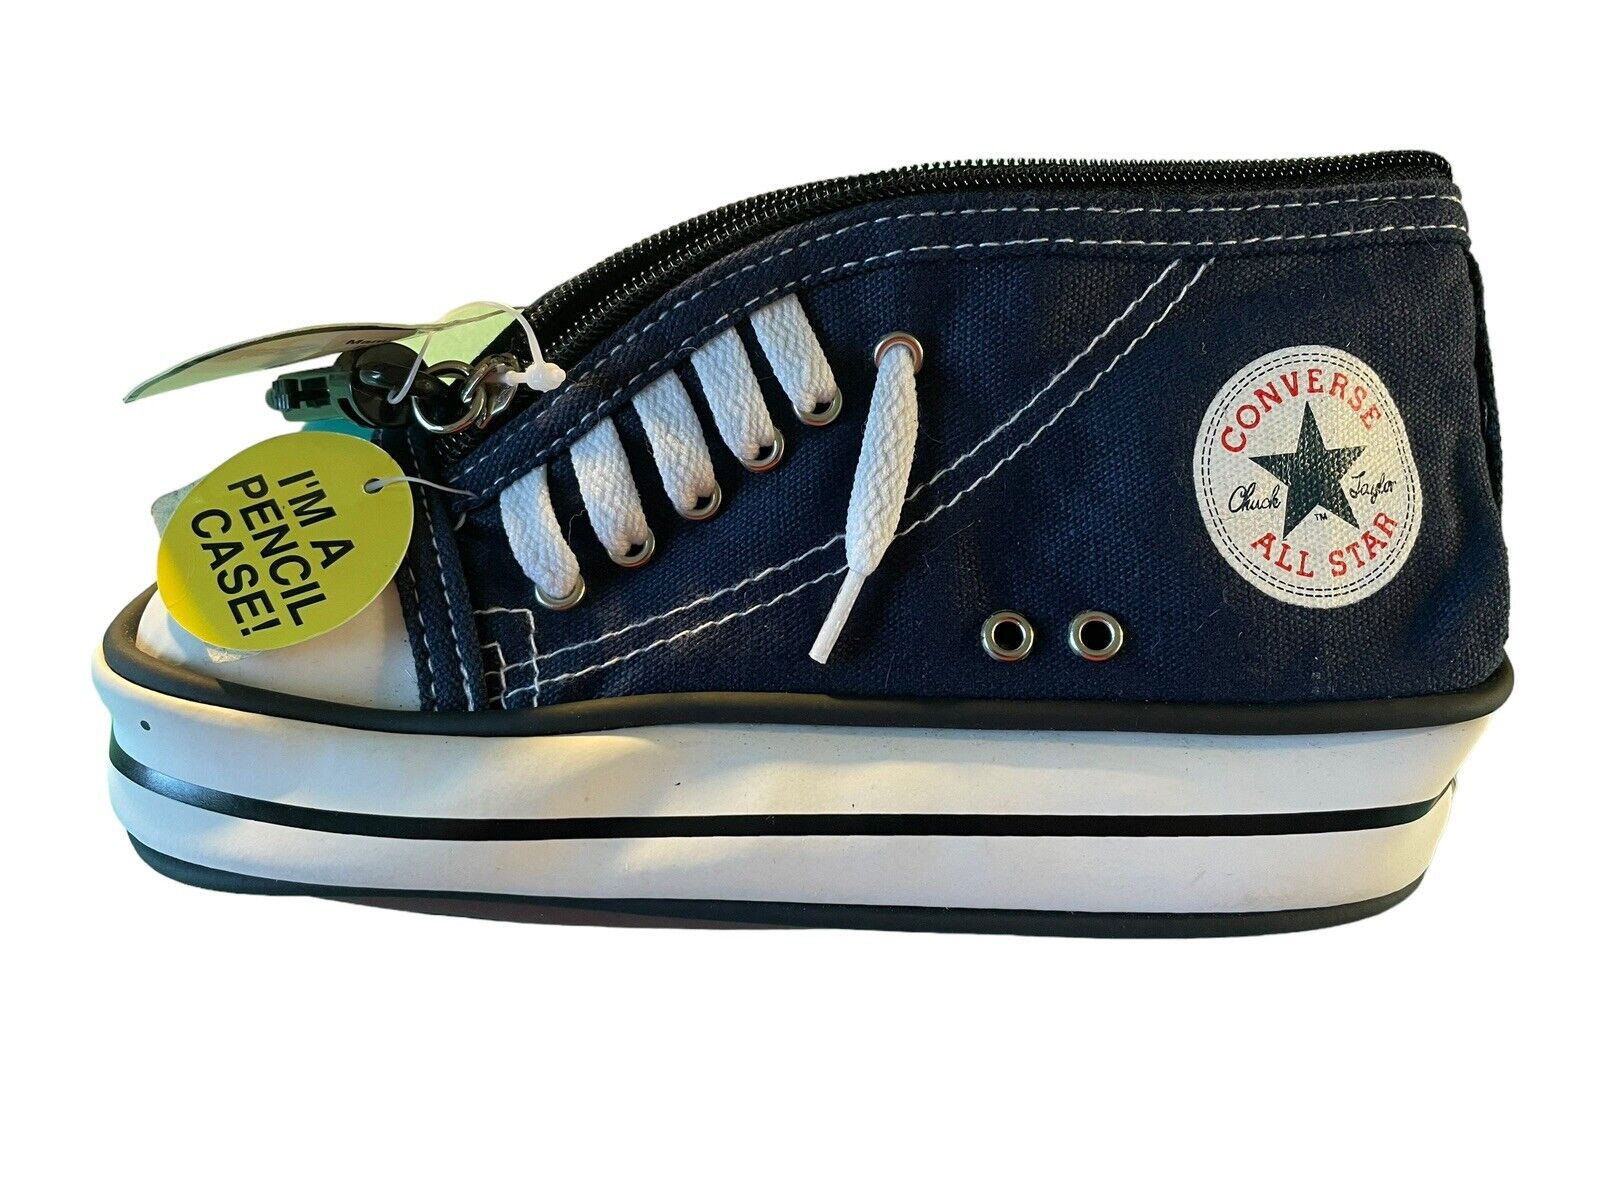 Vintage Converse Chuck Taylor All Star Sneaker Pencil Case Change Purse See Note